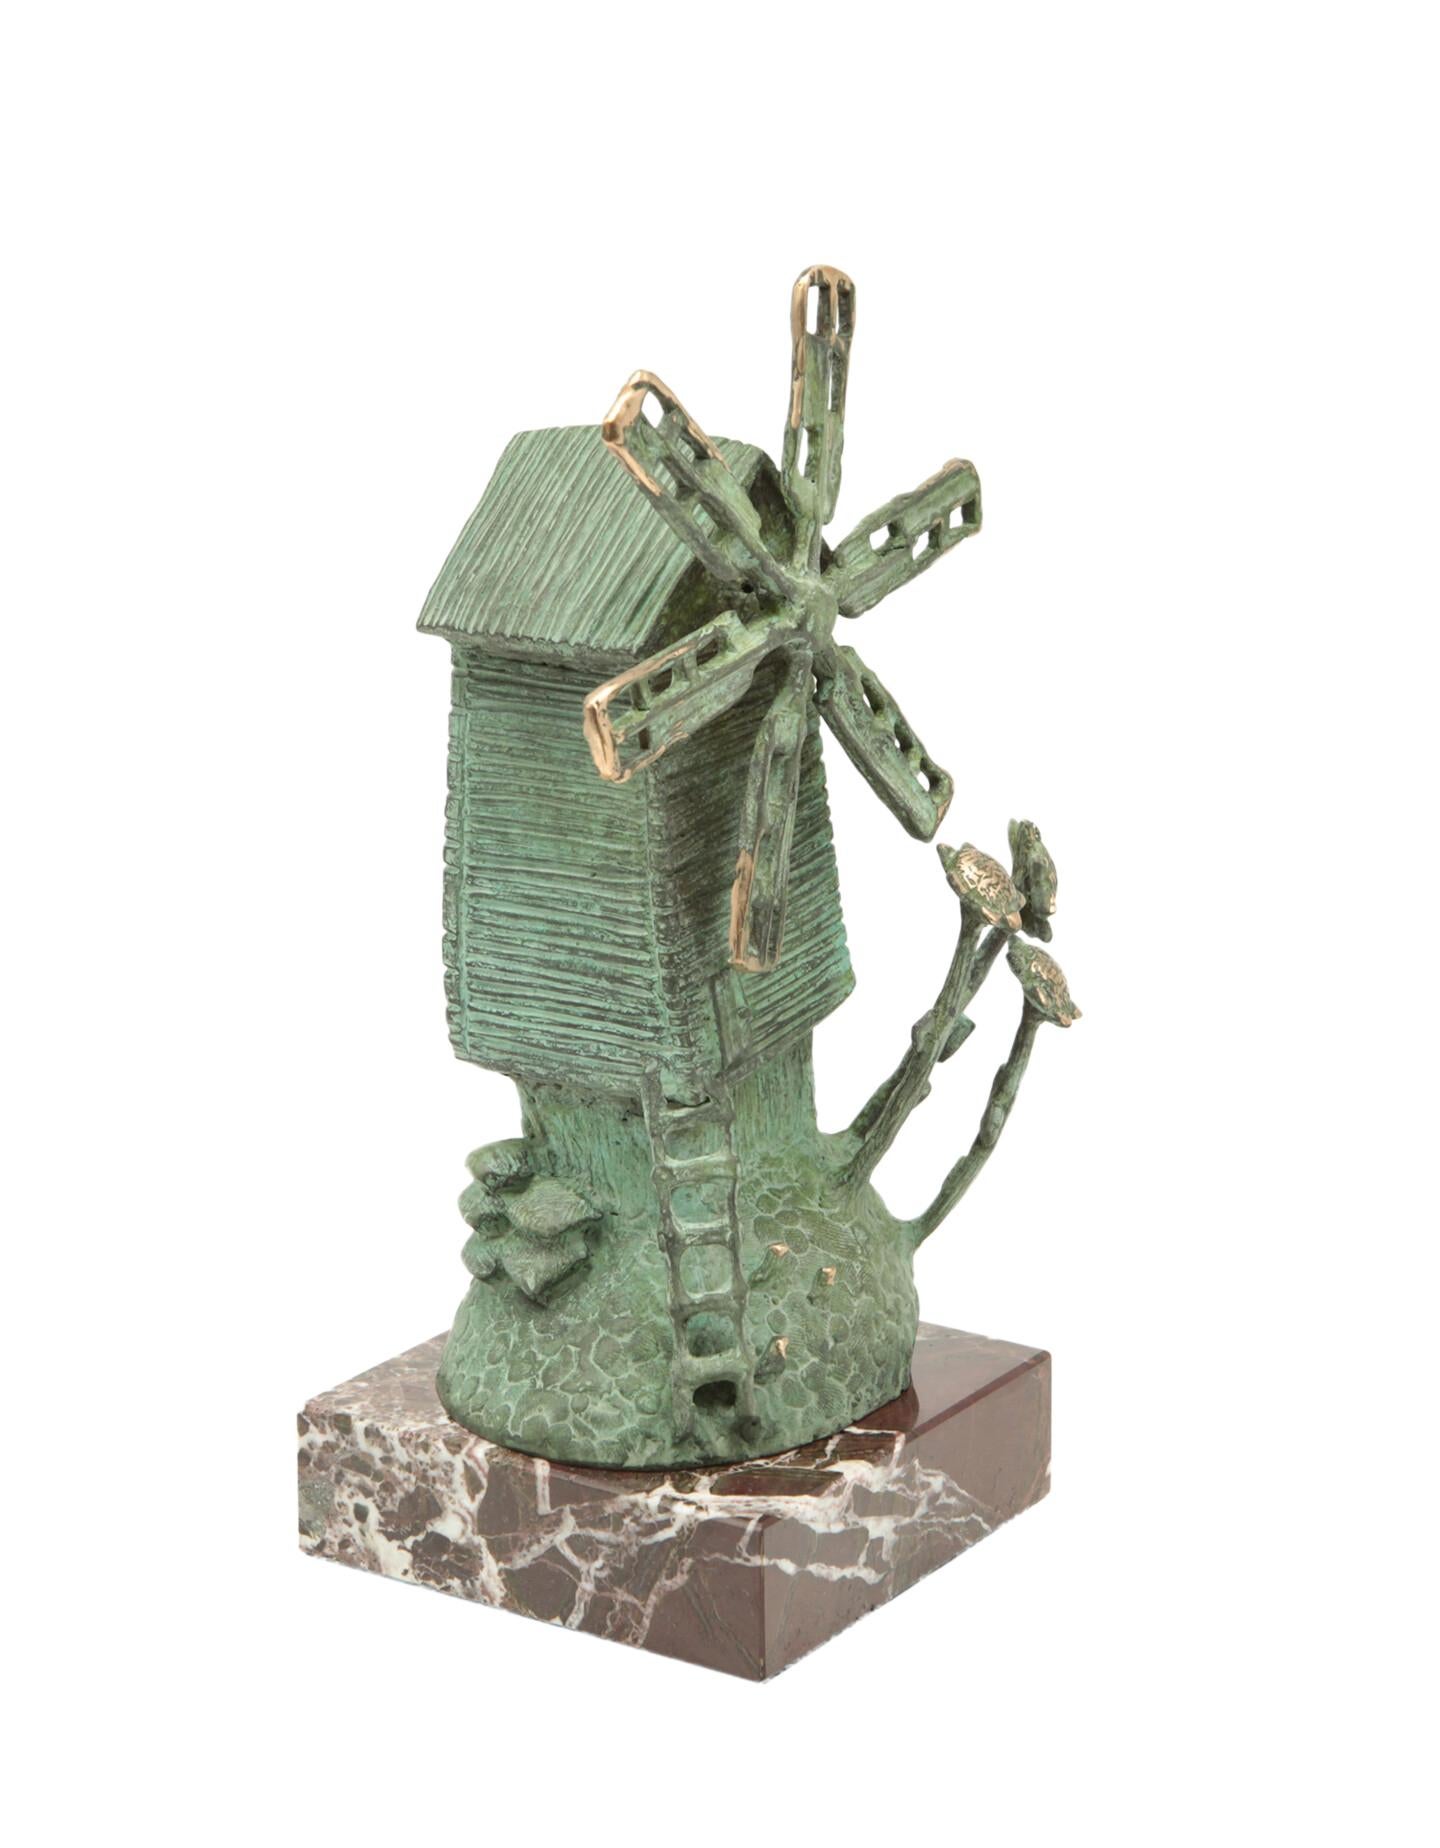 National Traditions 2, Bronze Sculpture by Volodymyr Mykytenko, 2012 For Sale 1